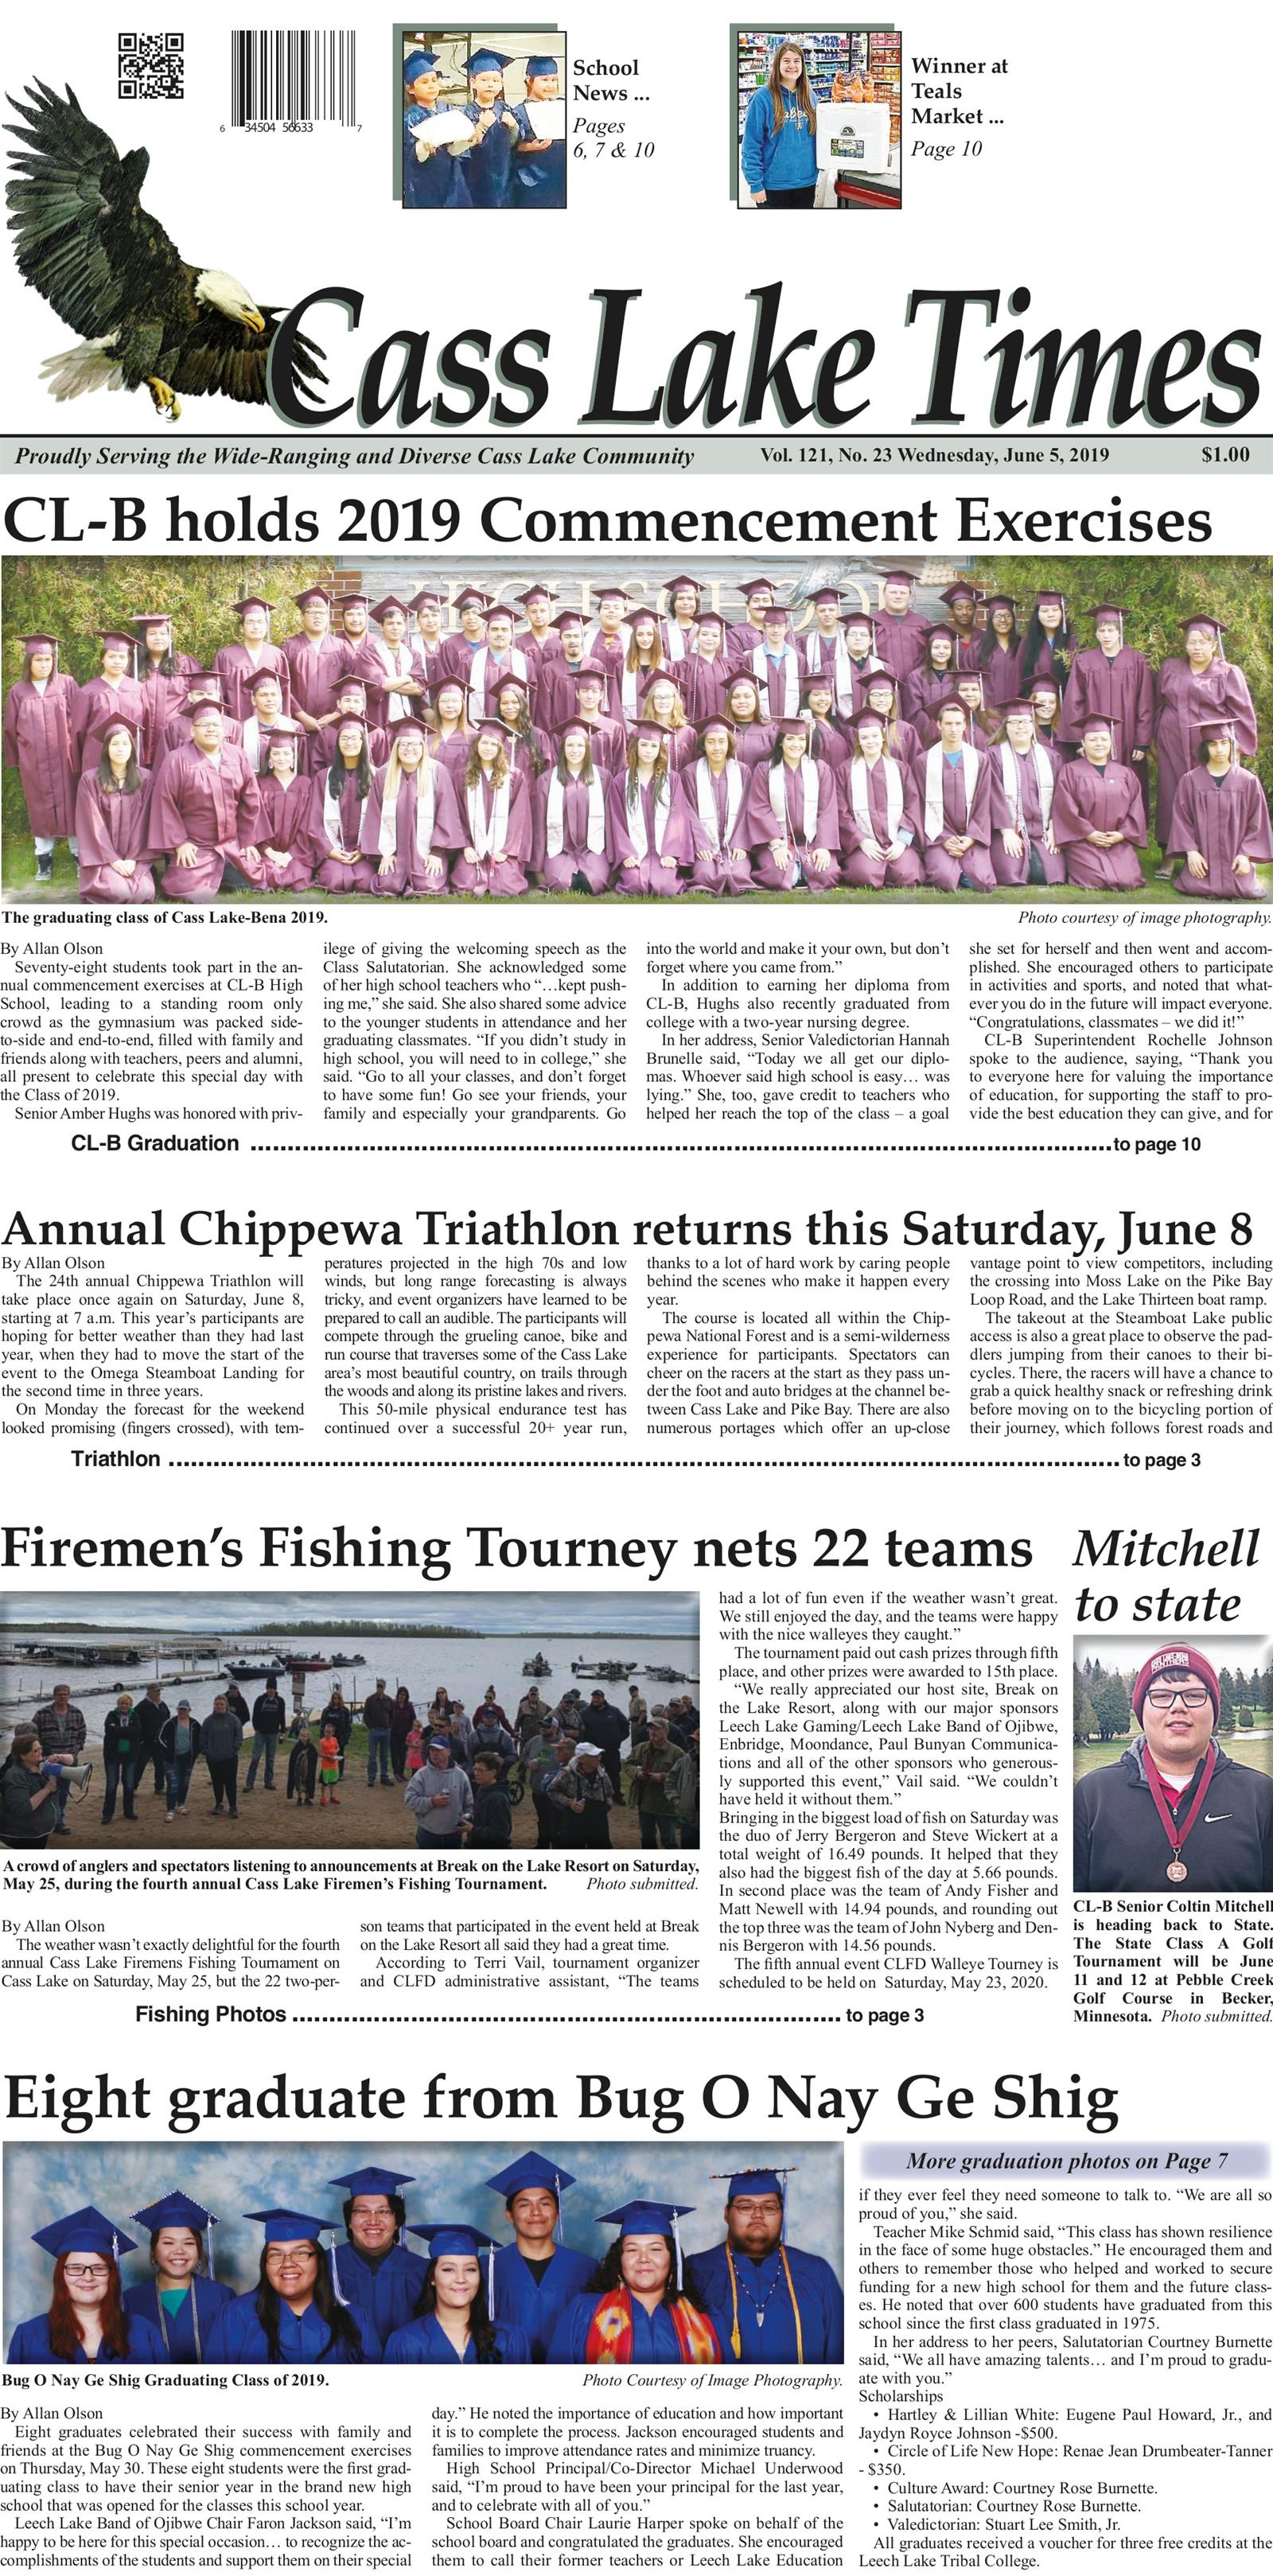 The Cass Lake Times June 5, 2019